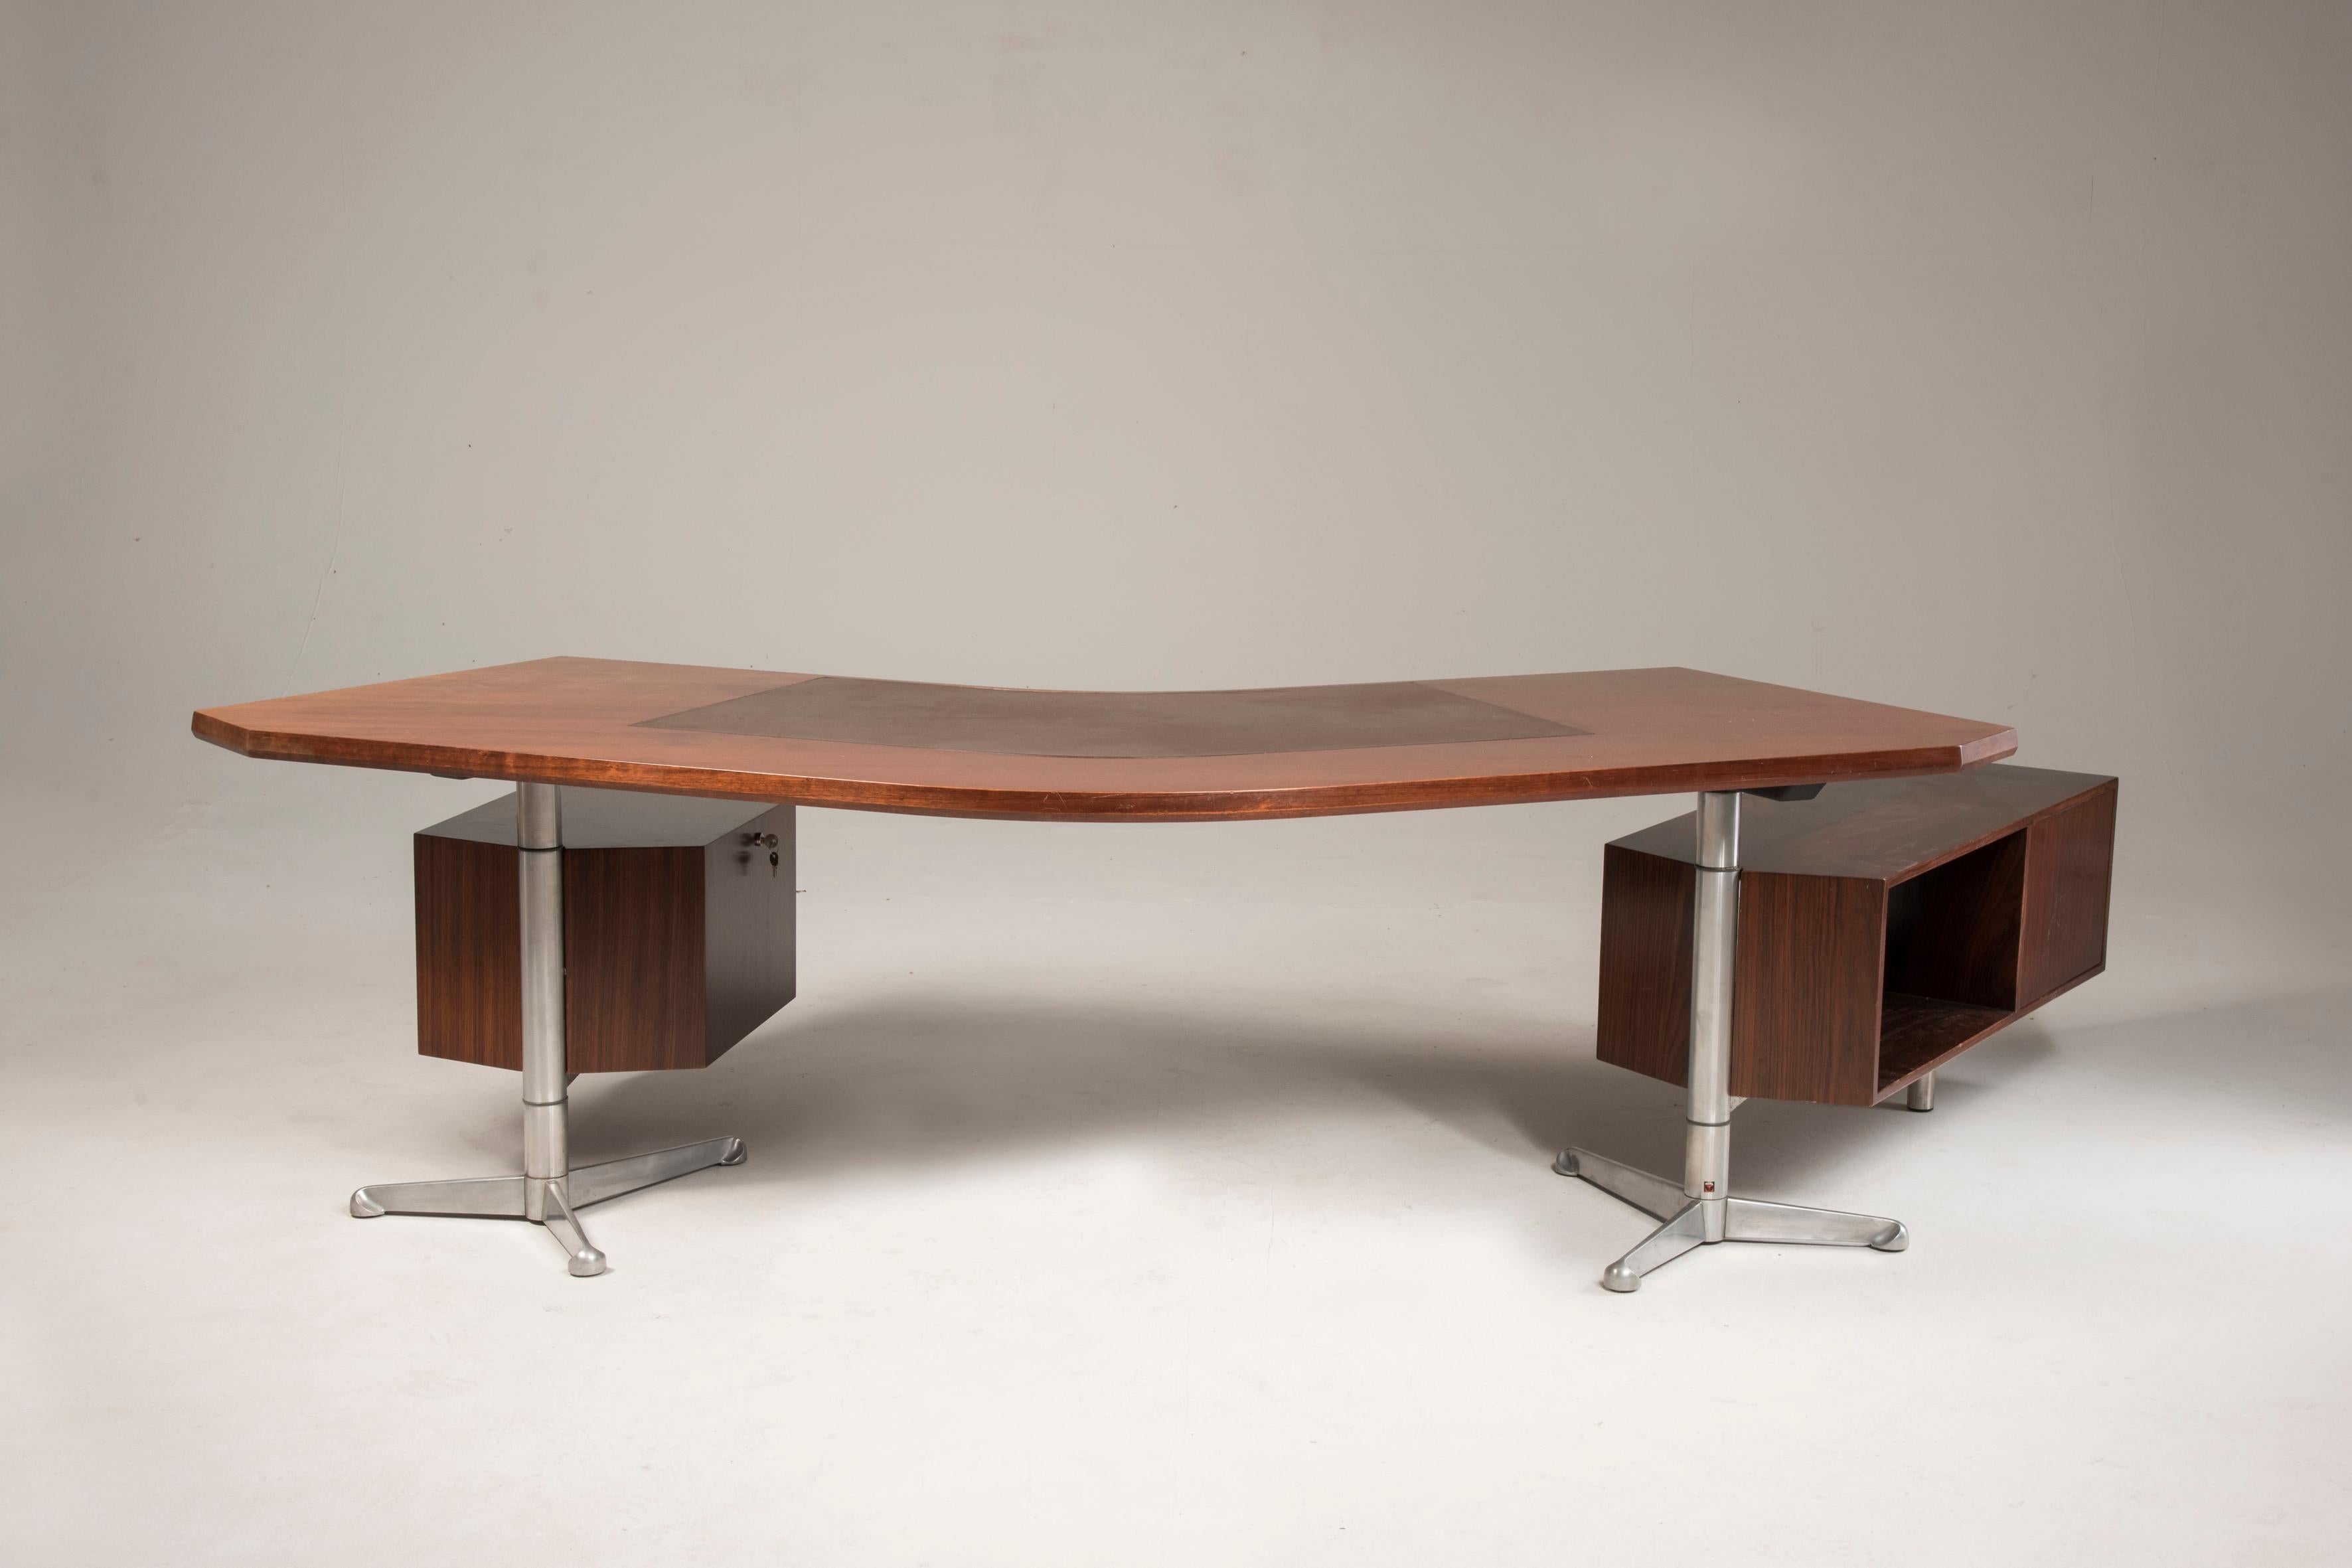 This large executive desk model T96 was designed by Osvaldo Borsani in 1956  and produced by Tecno in Milan, Italy. This pieces features original tags from Tecno production and shows a 